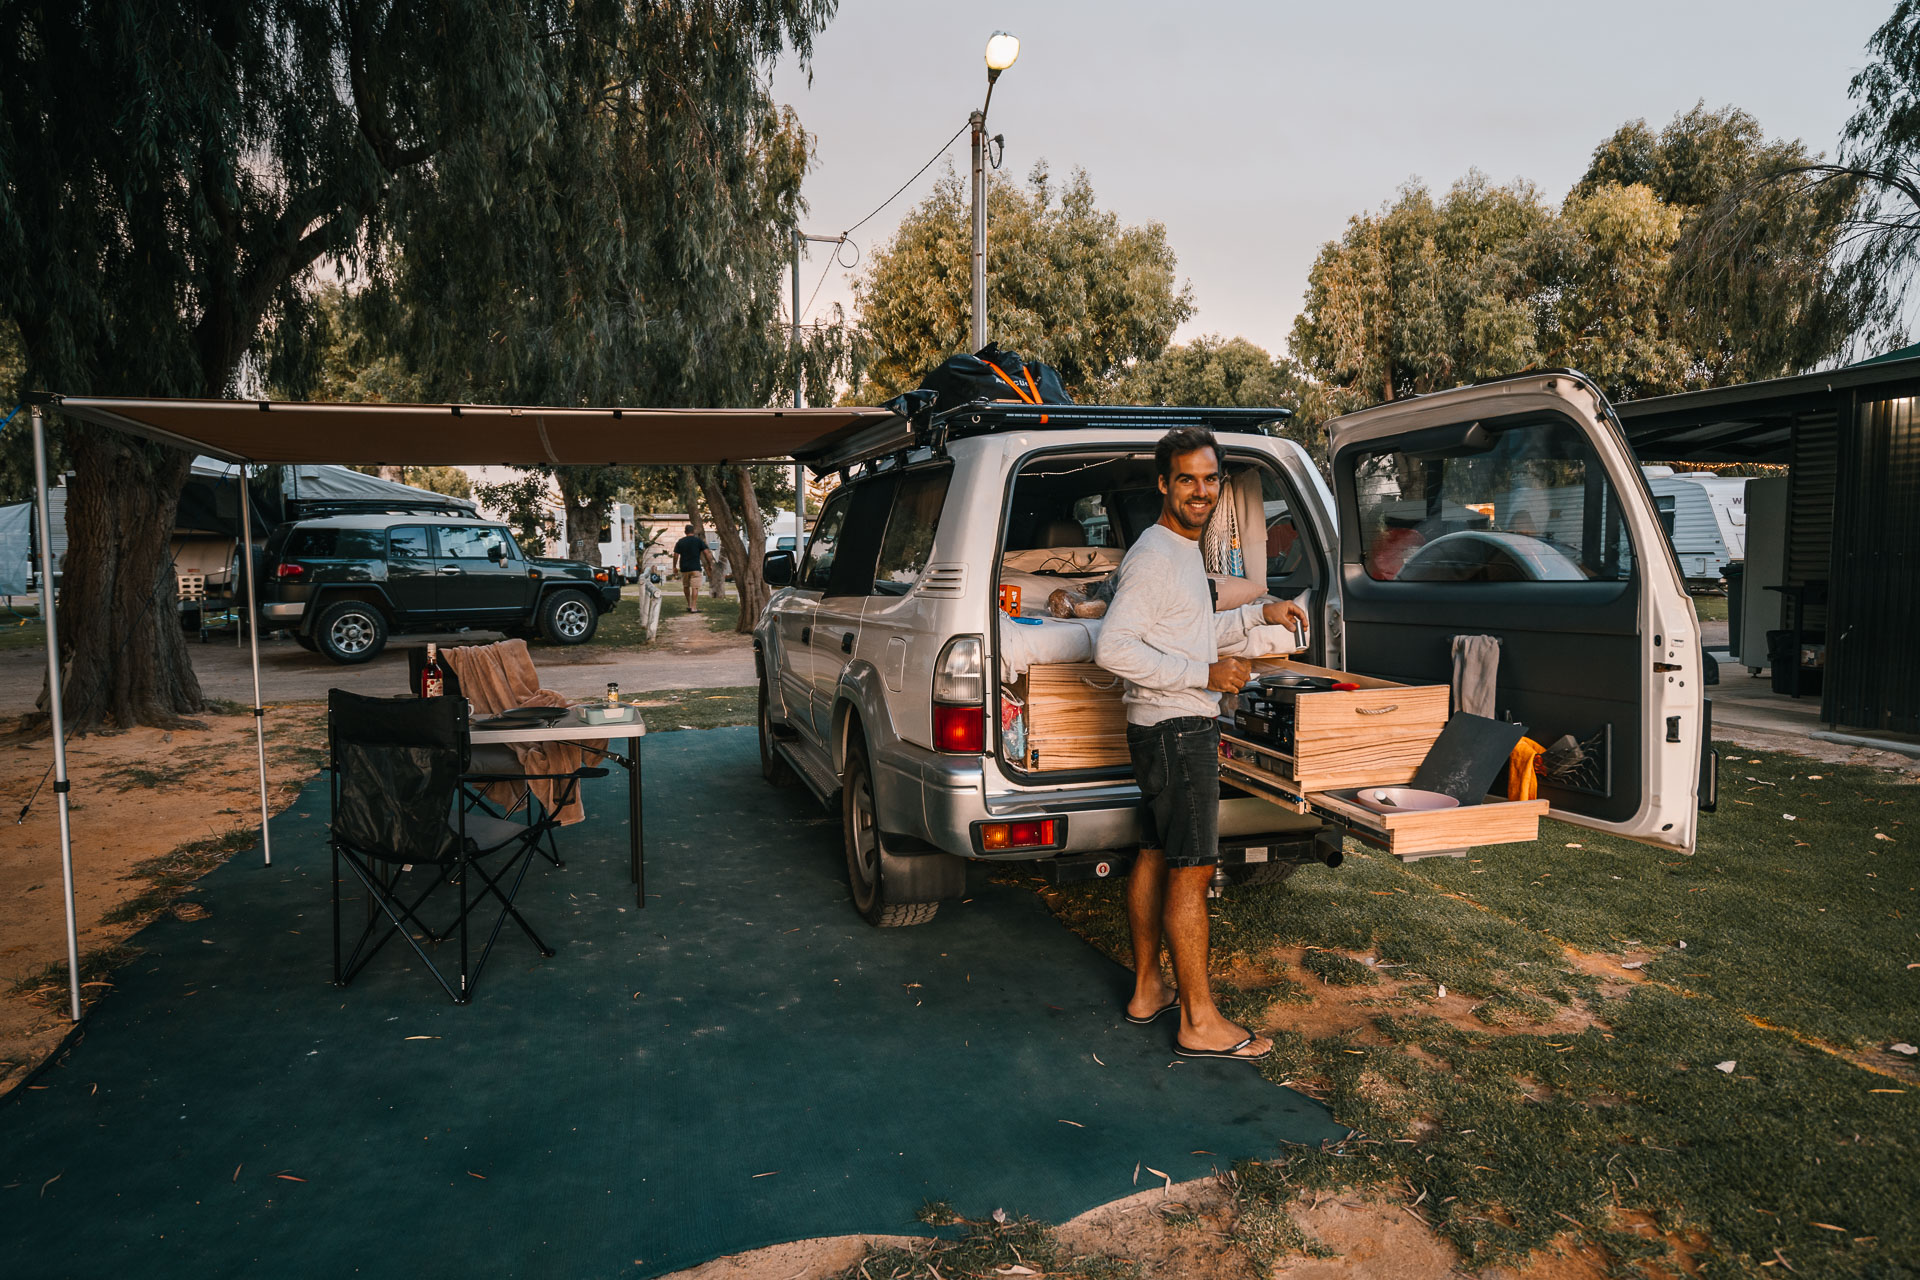 Bathers Paradise Campground - Coco2- BLOGPOST HQ